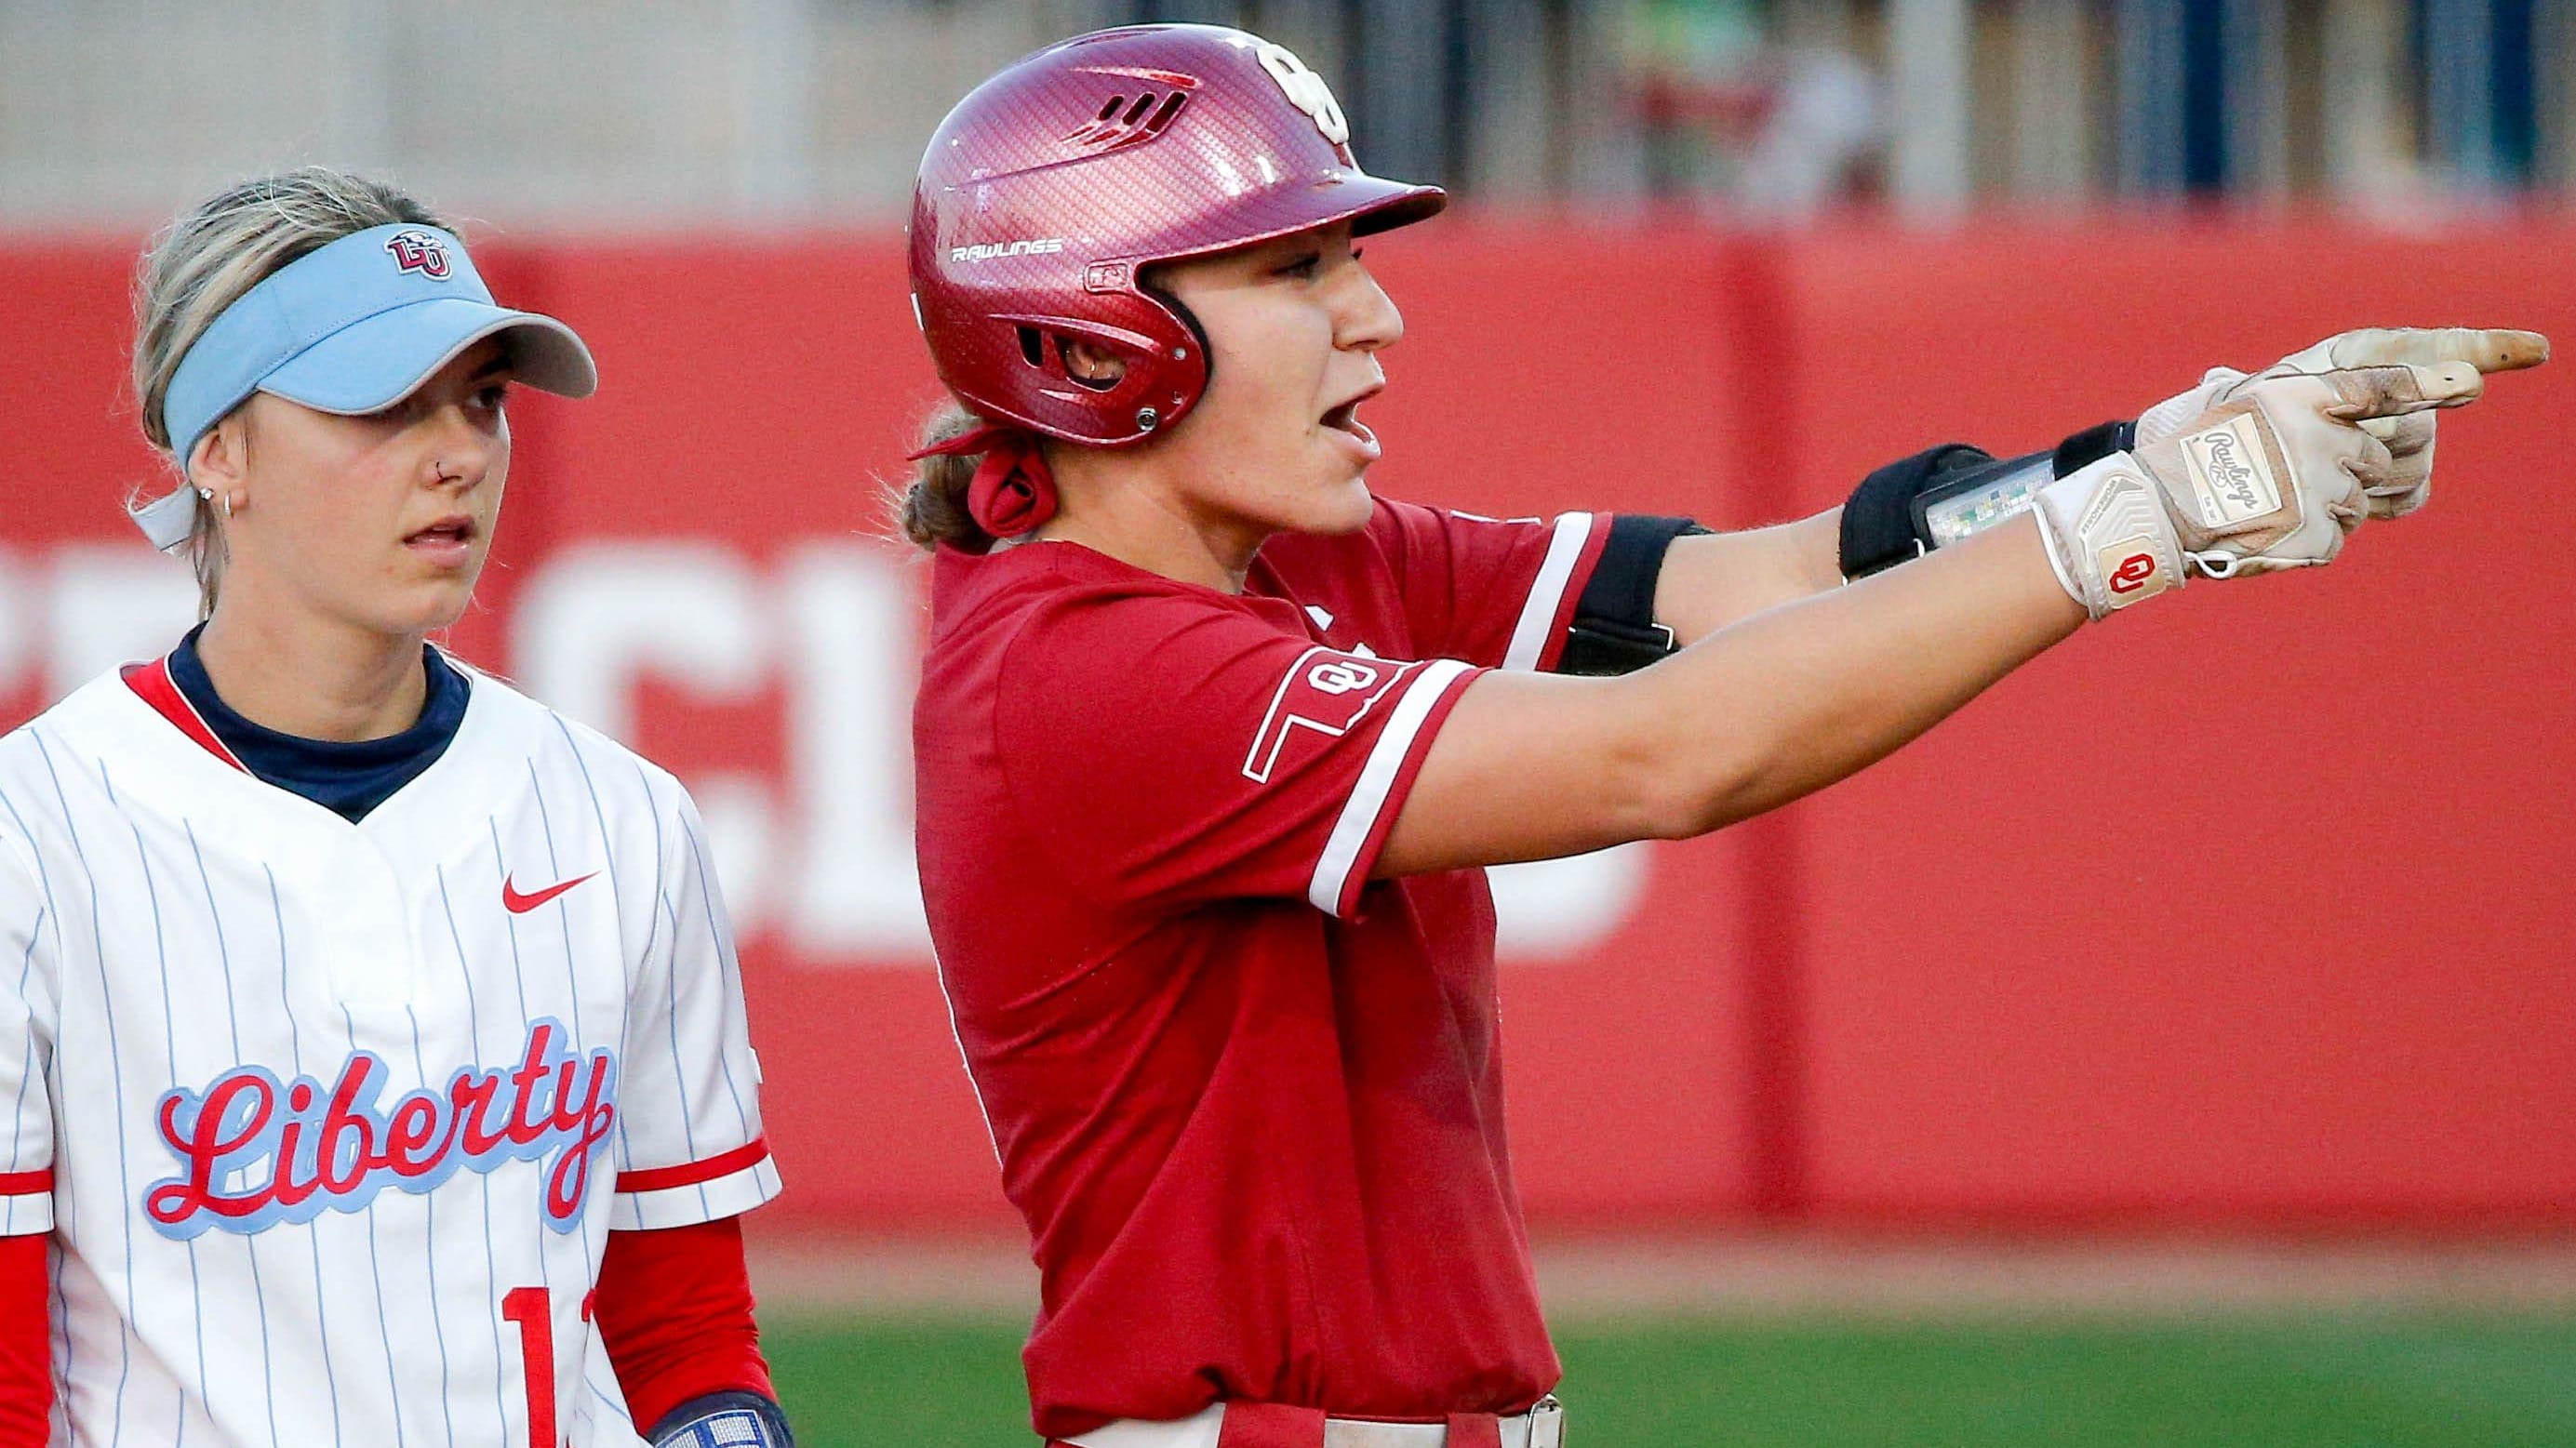 OU Softball: Oklahoma Responds With Emphatic Victory Over Wichita State